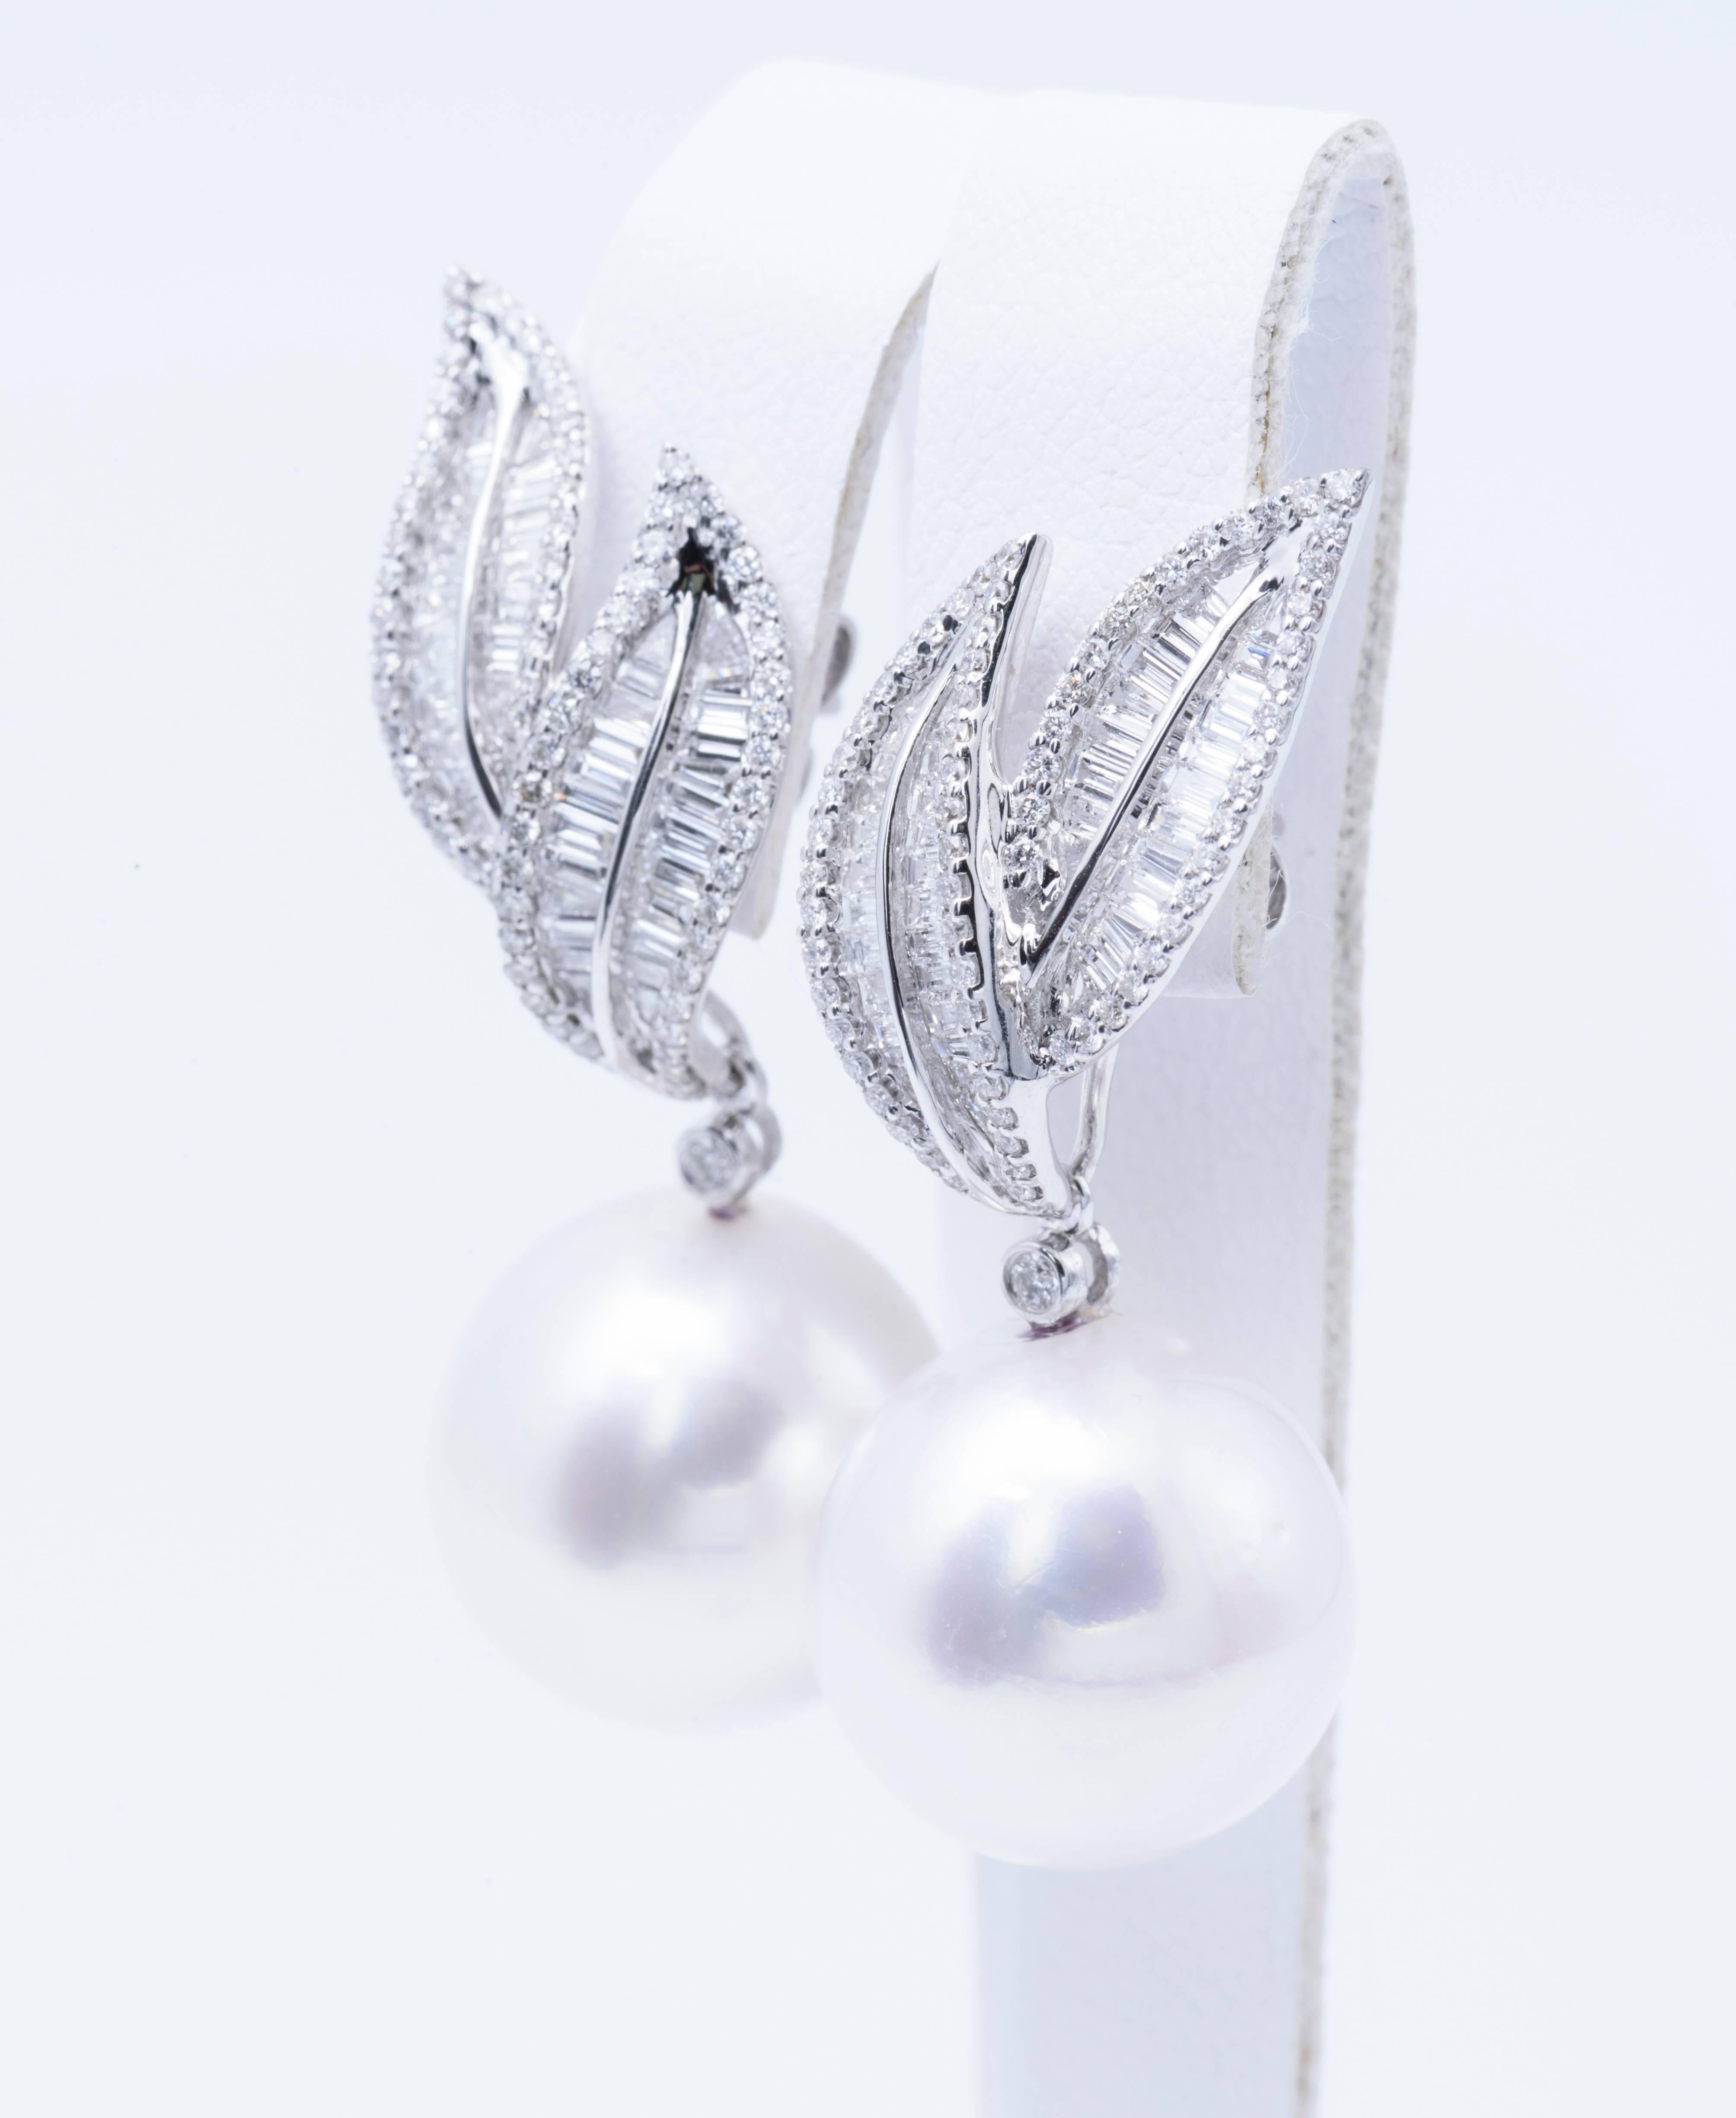 South Sea Pearl drop earrings measuring 14-15 mm with diamond baguettes and round brilliants weighing 1.60 Carats in 18 karat white gold.